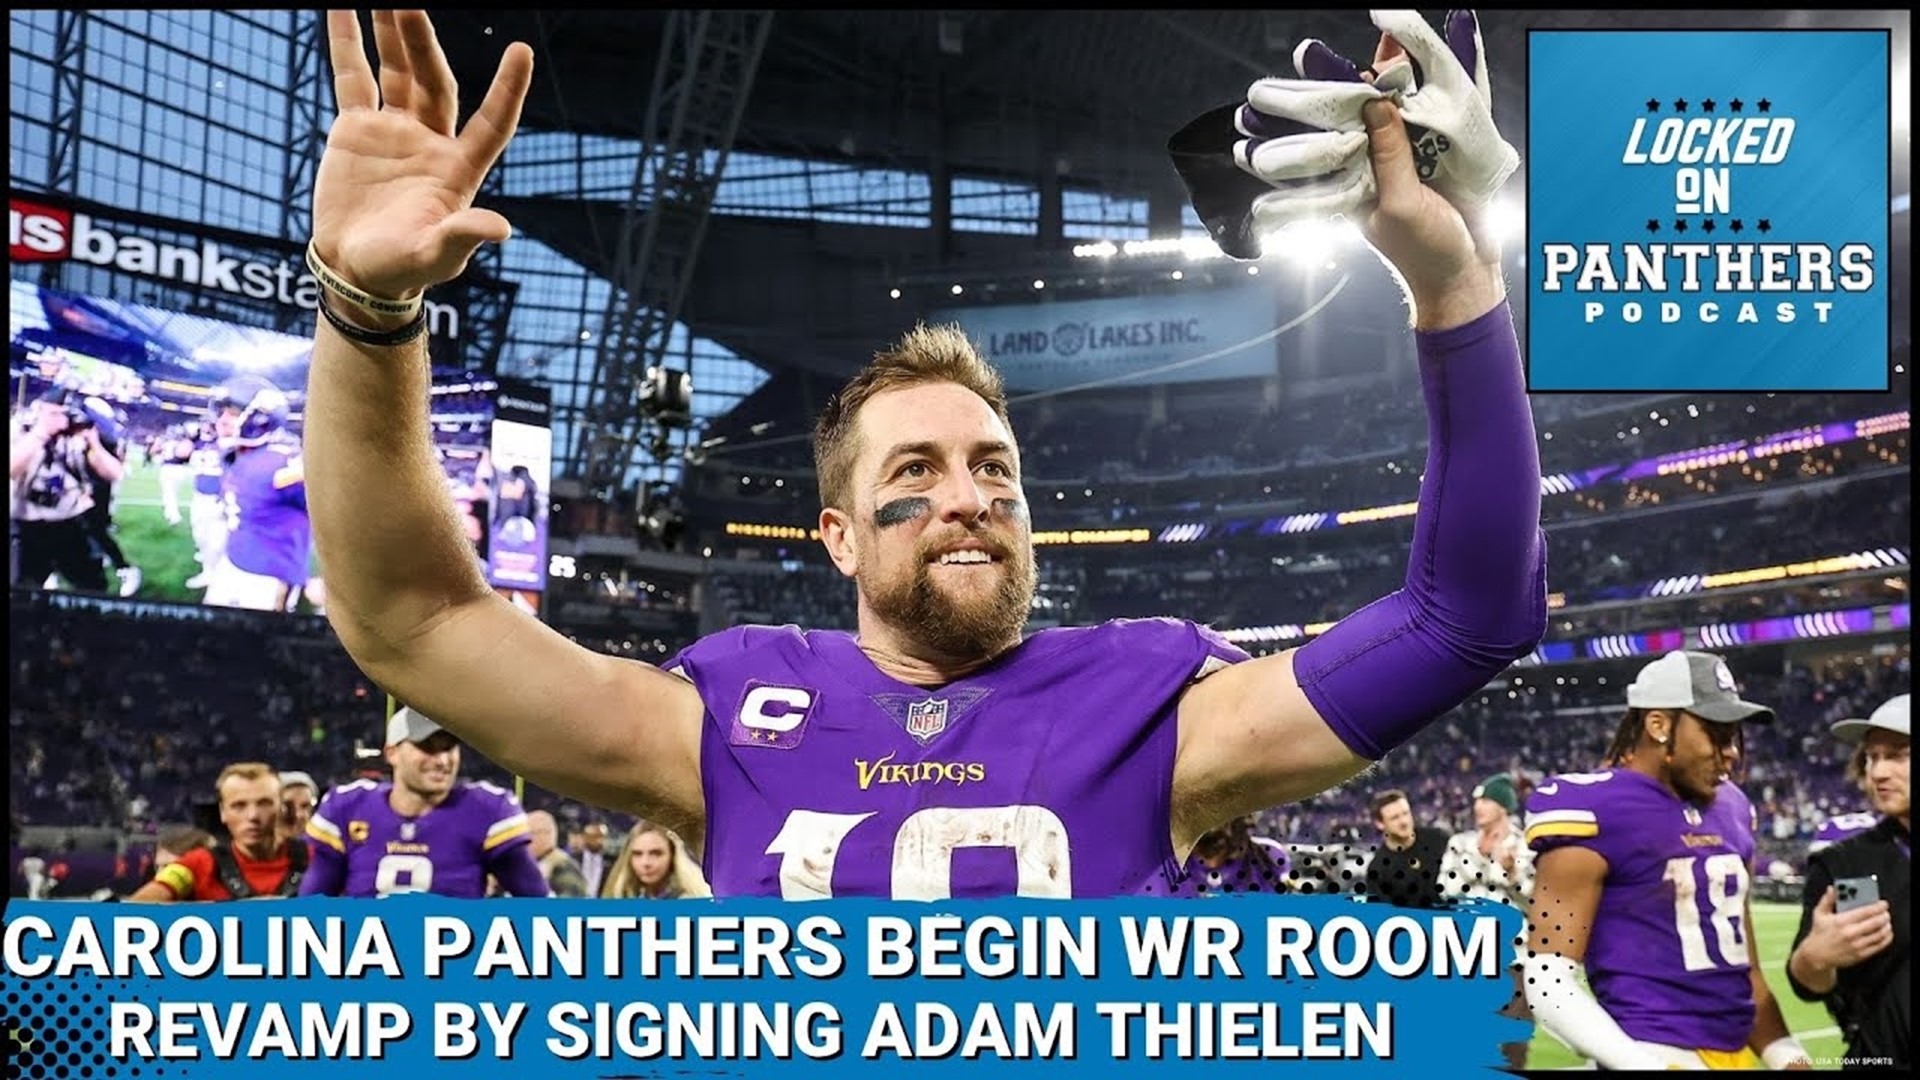 The Carolina Panthers agreed to terms with former Minnesota Vikings WR Adam Thielen on Sunday evening checking the final box of Julian Council's free agency needs.